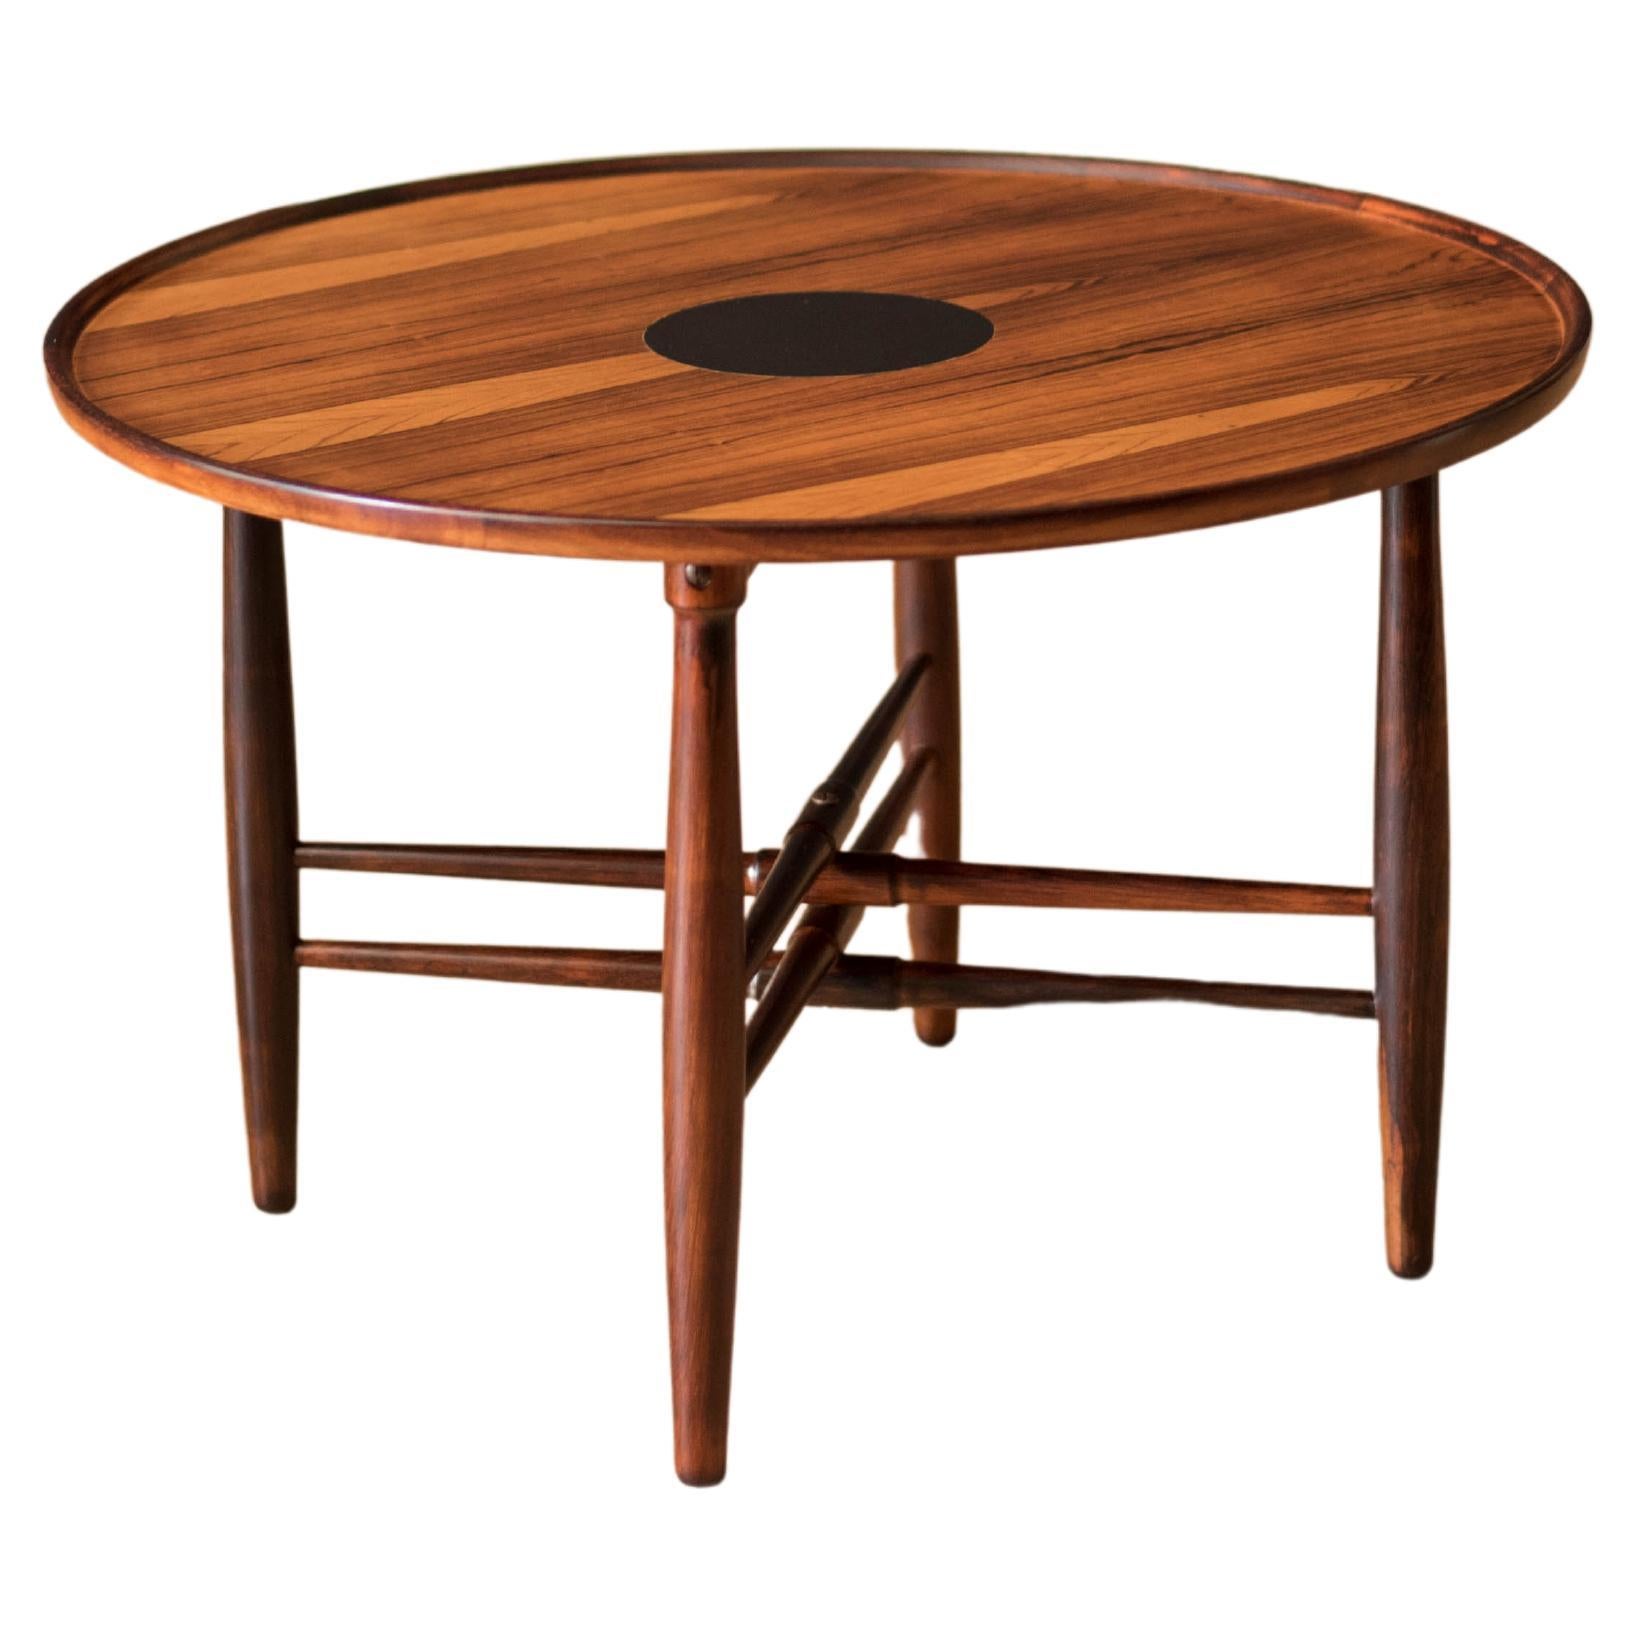 Vintage Danish Rosewood Round Occasional Side Table by Poul Hundevad For Sale